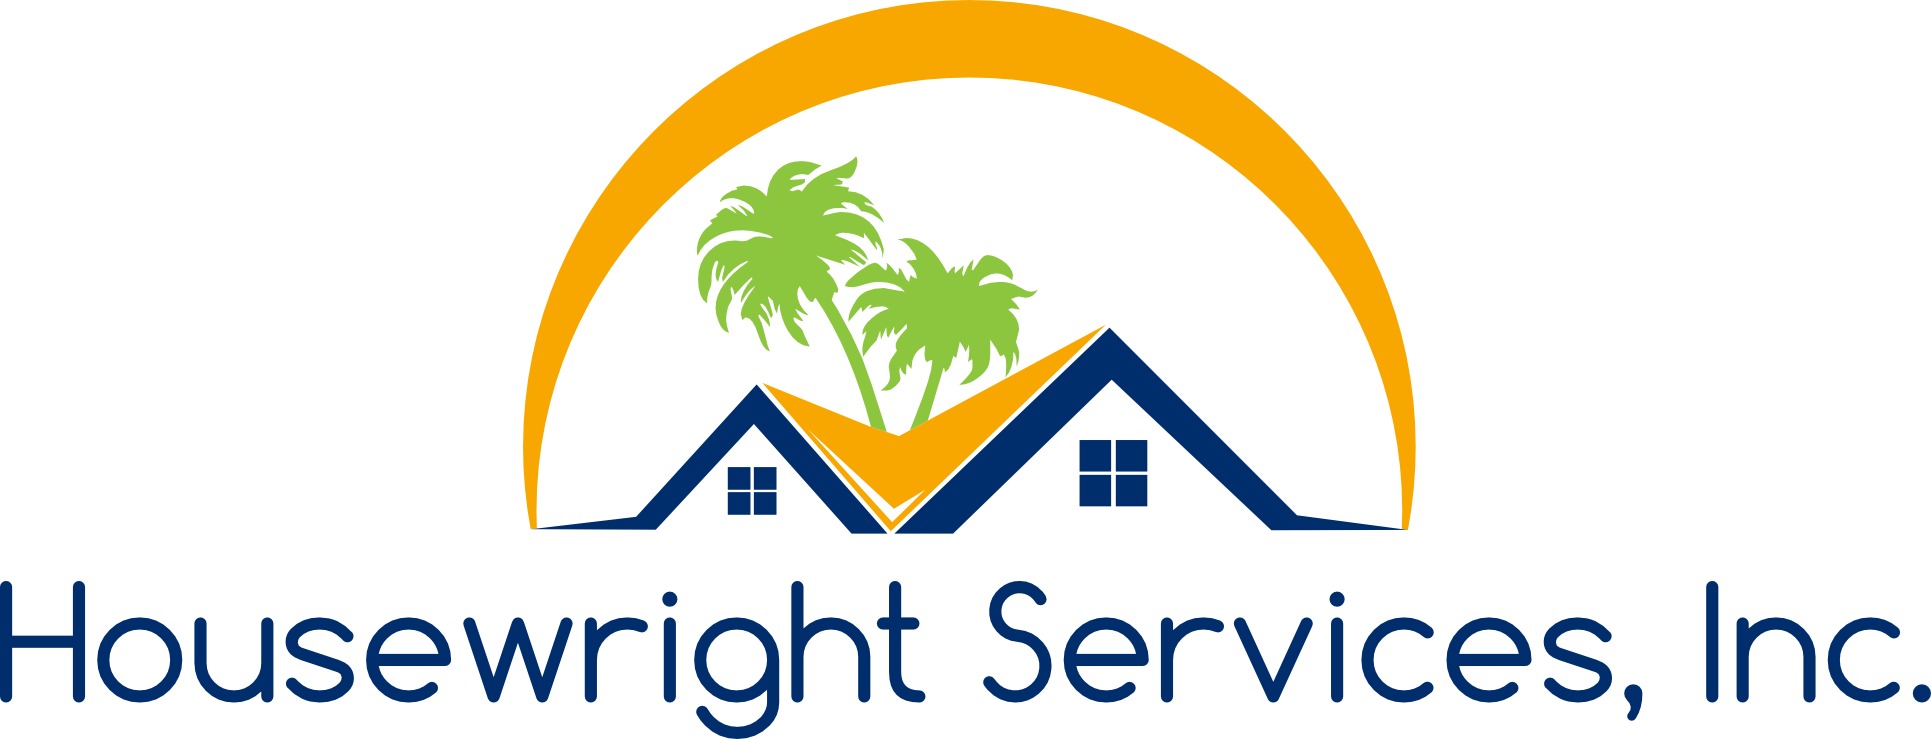 Housewright Services, Inc. Logo